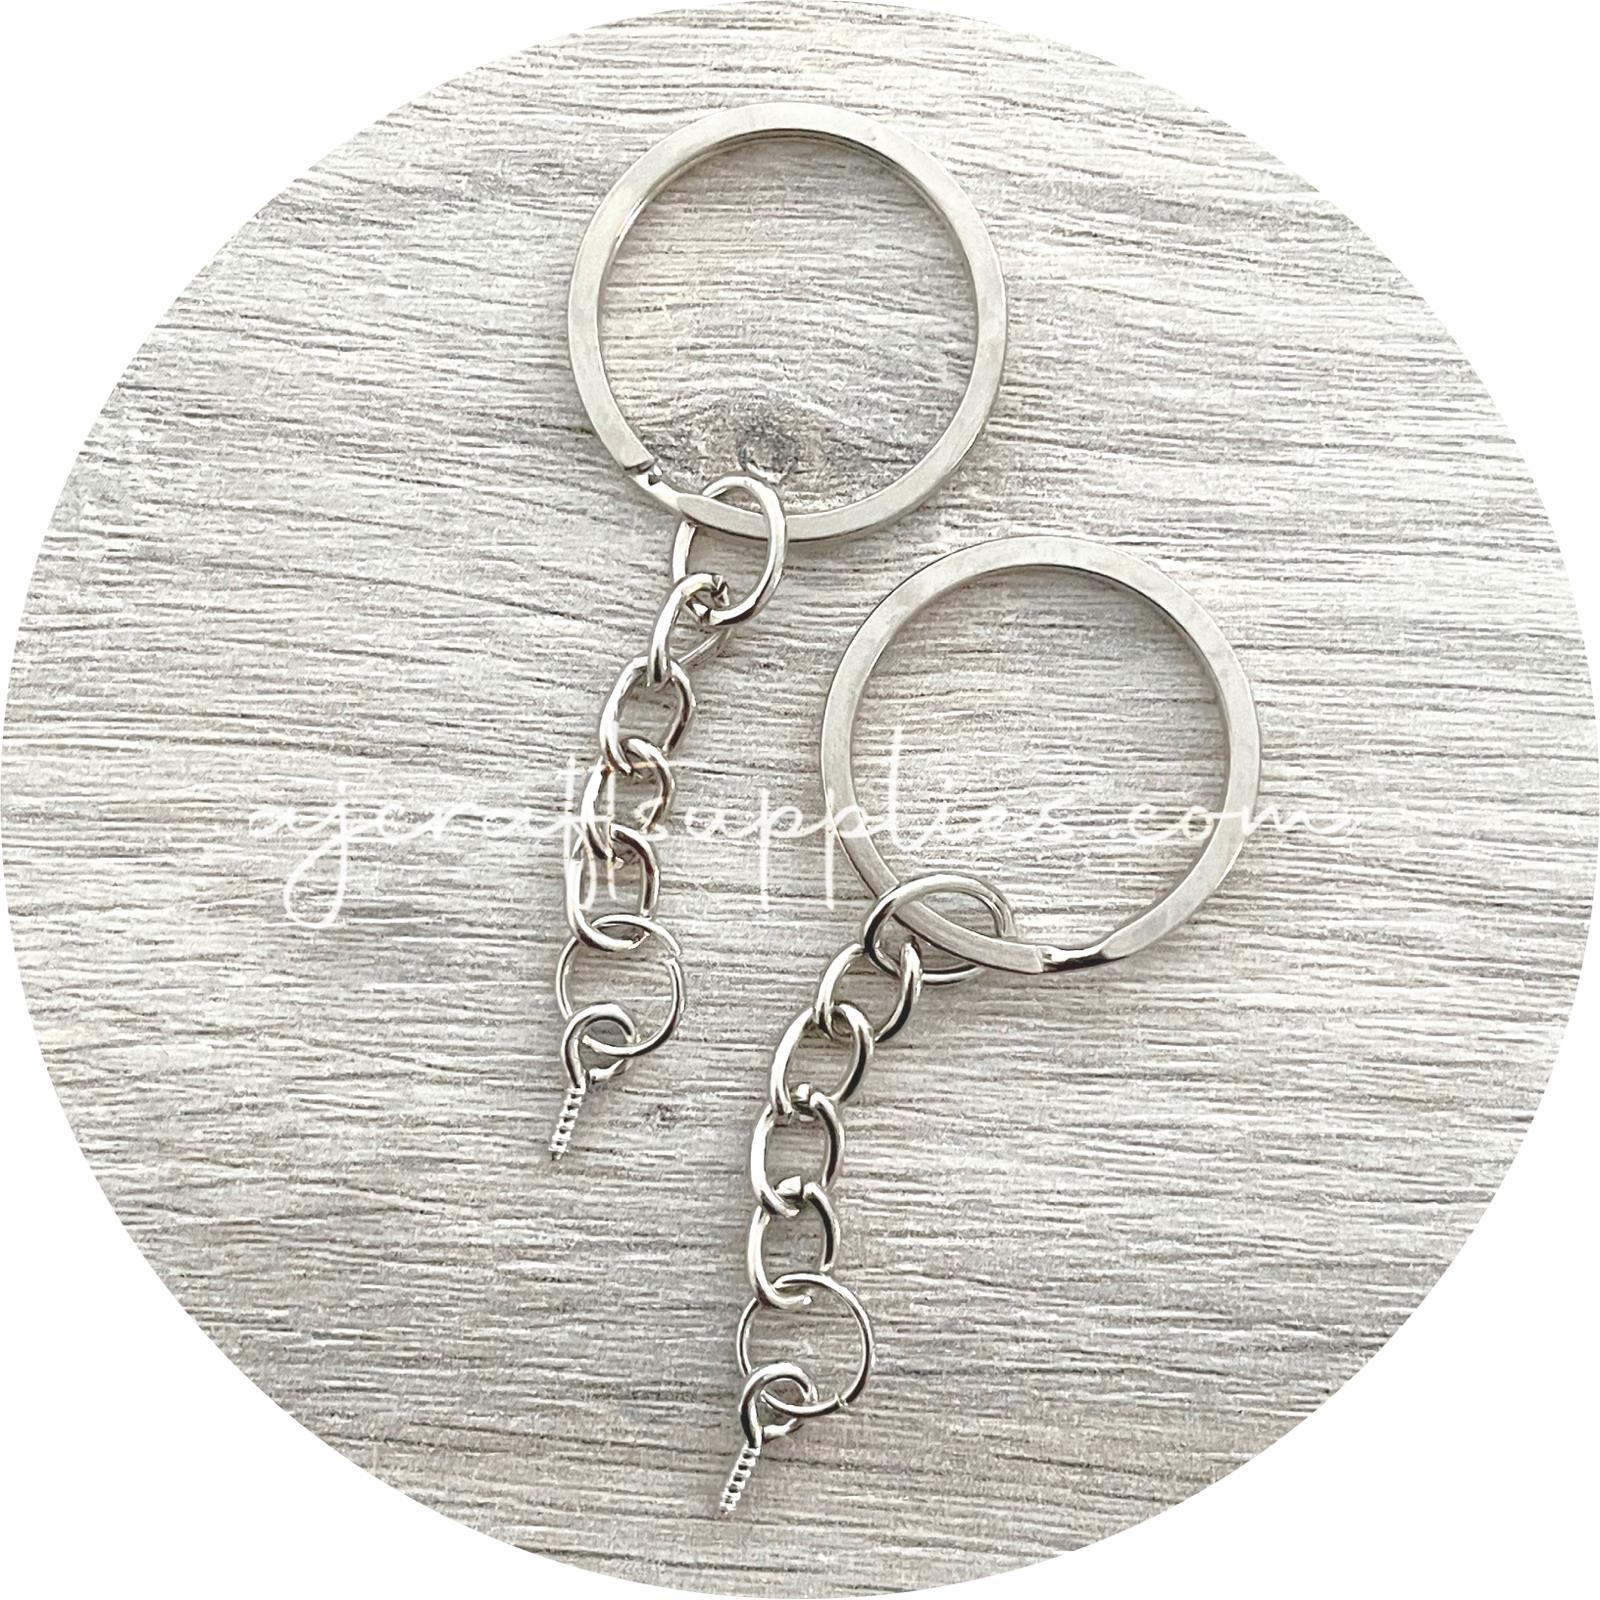 25mm Split Ring Keyring with Chain & Eye pin - Silver - 5 Rings